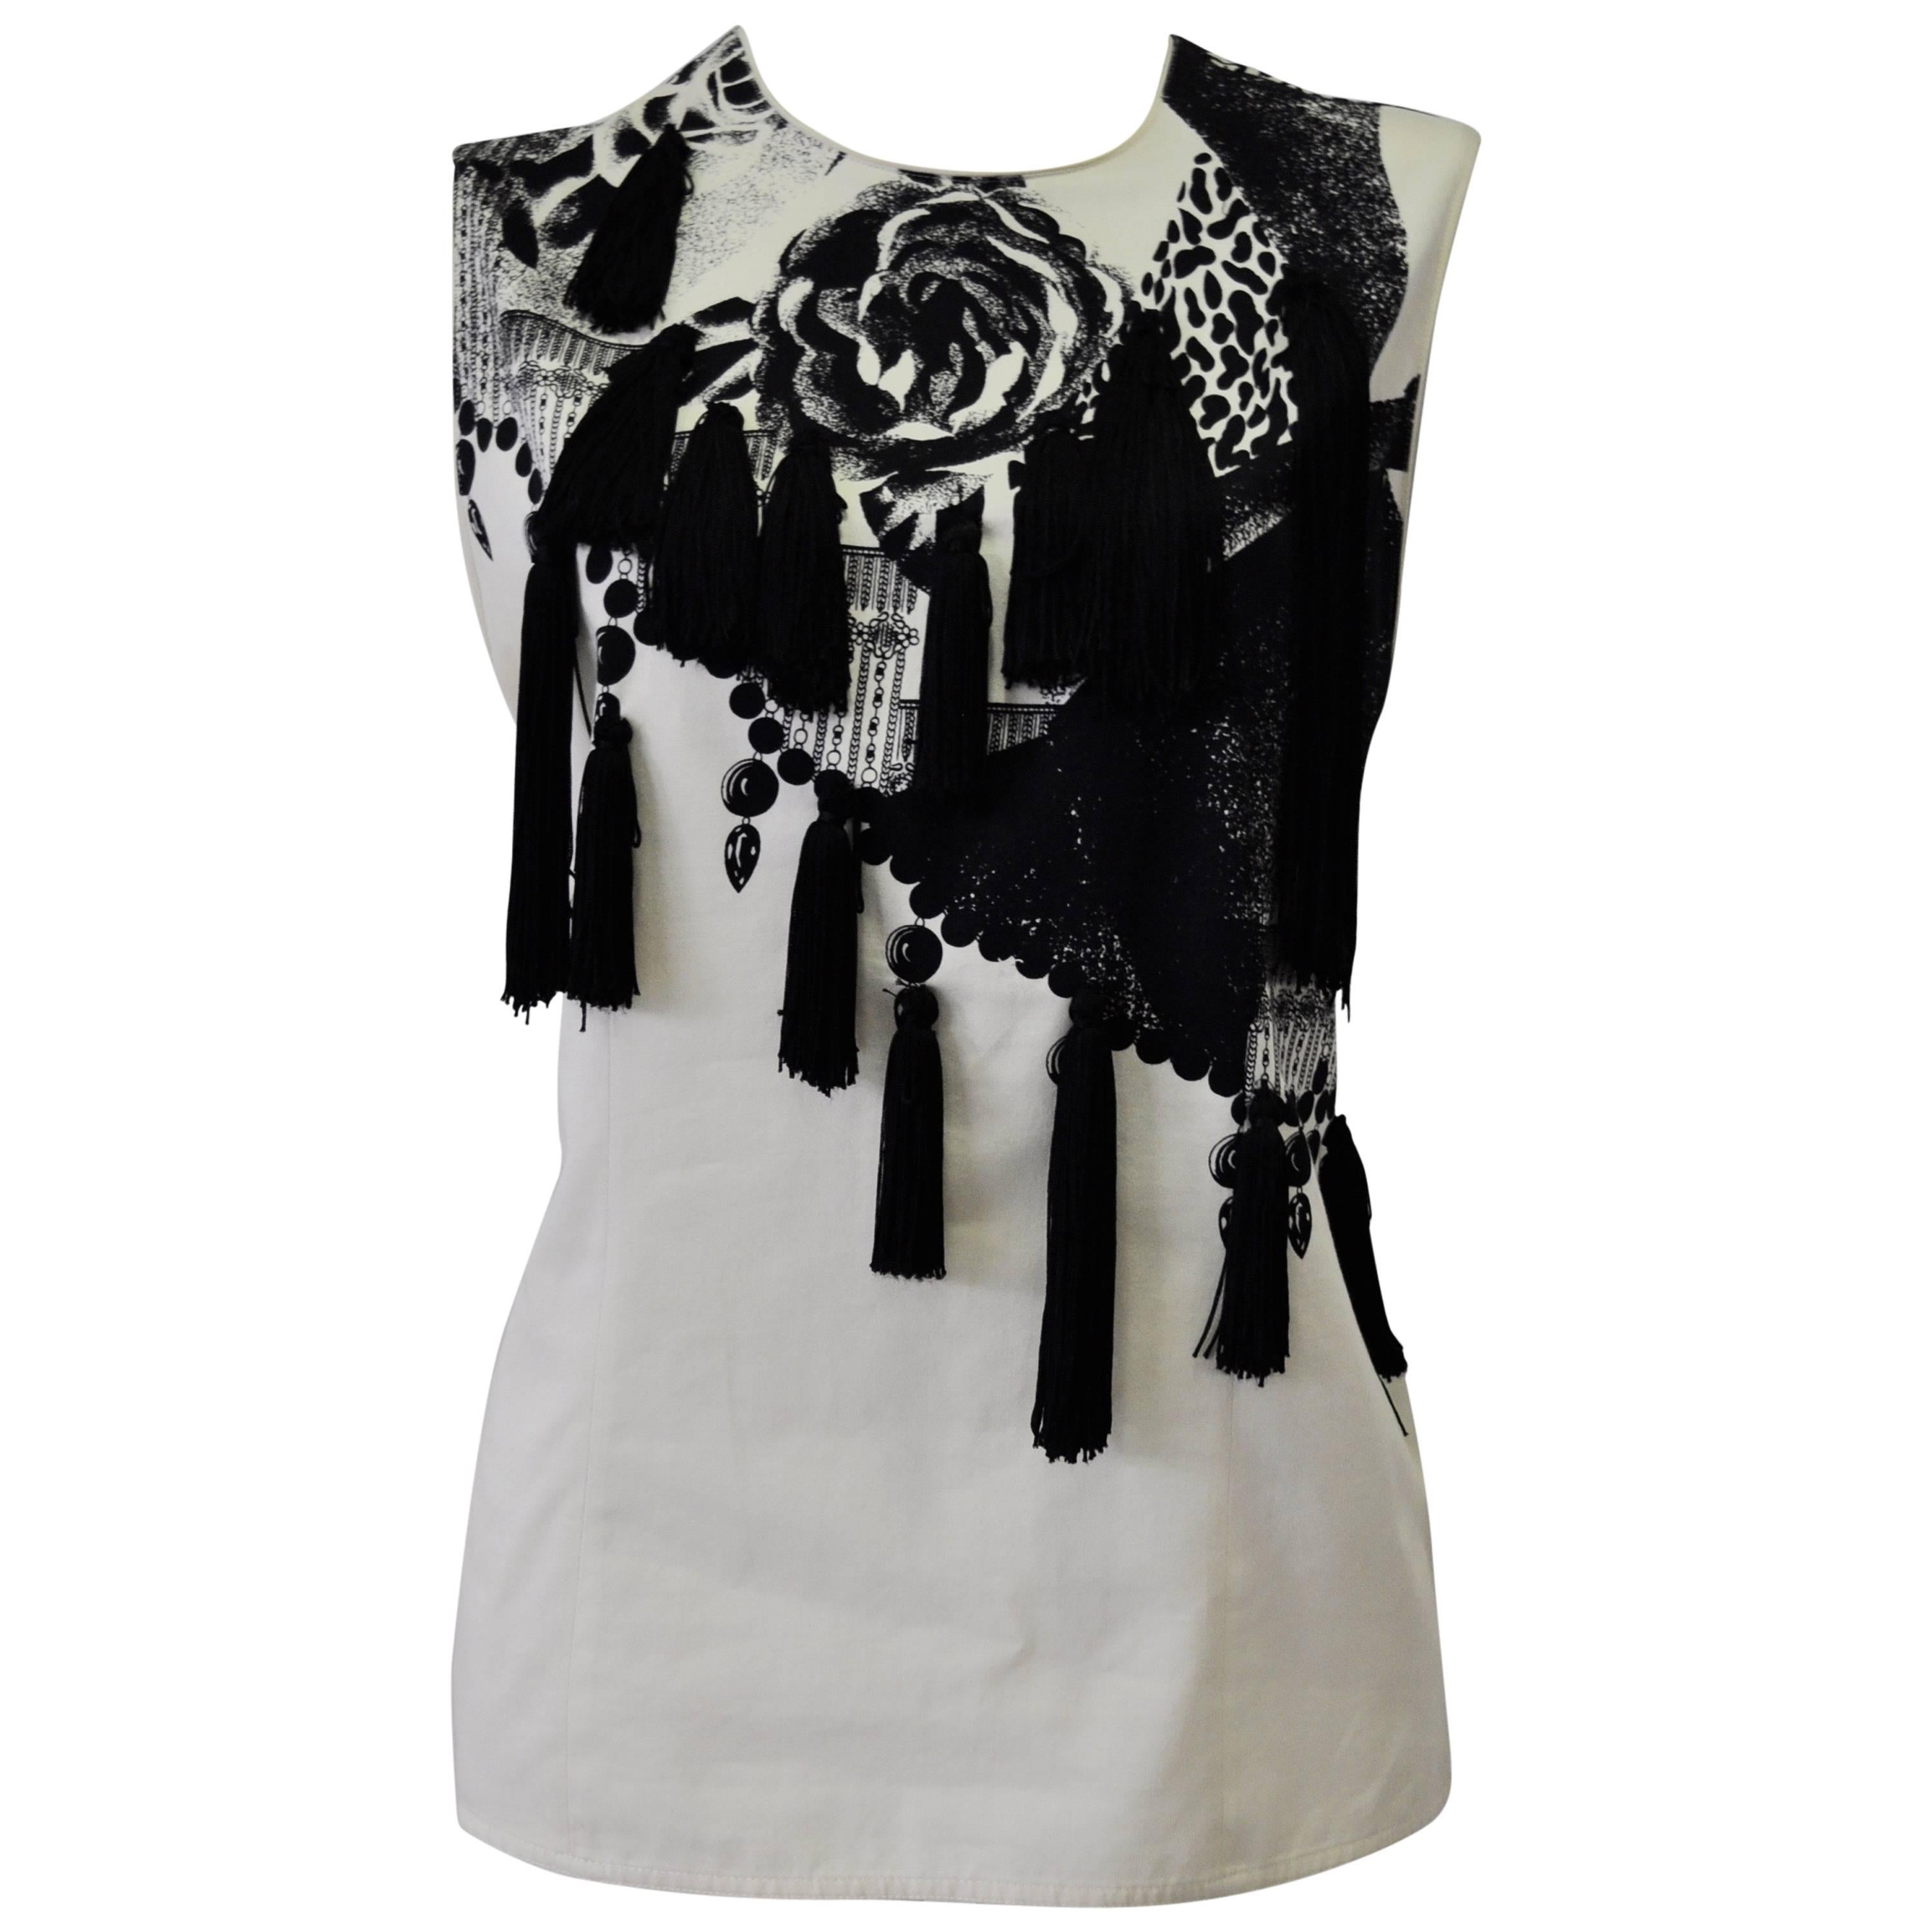 Gianni Versace Abstract Floral Leopard Print with Ornate Tassels Top For Sale